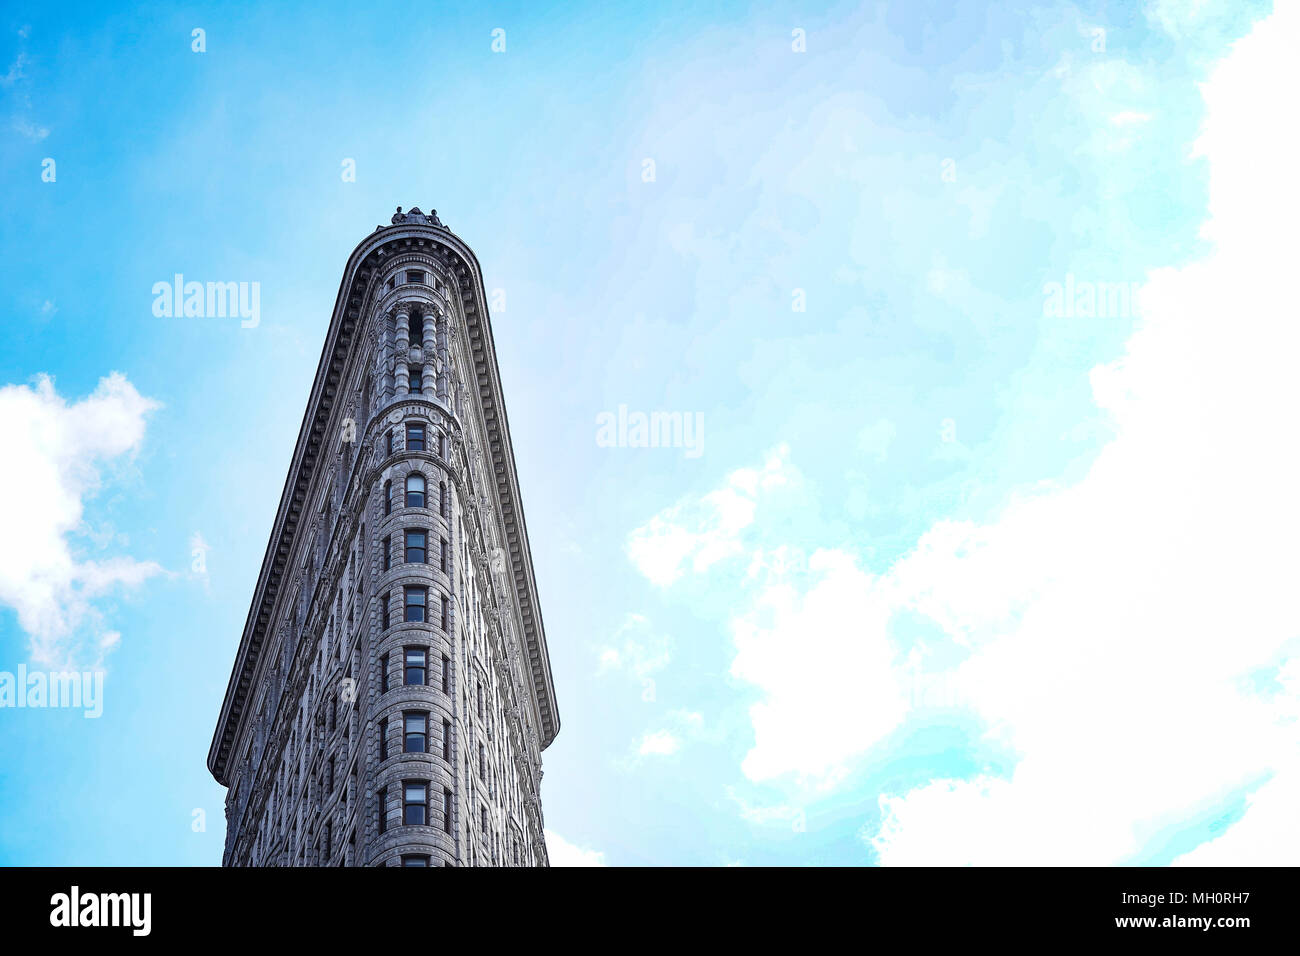 The Flat Iron building in New York City in the United States. From a series of travel photos in the United States. Photo date: Sunday, April 8, 2018.  Stock Photo